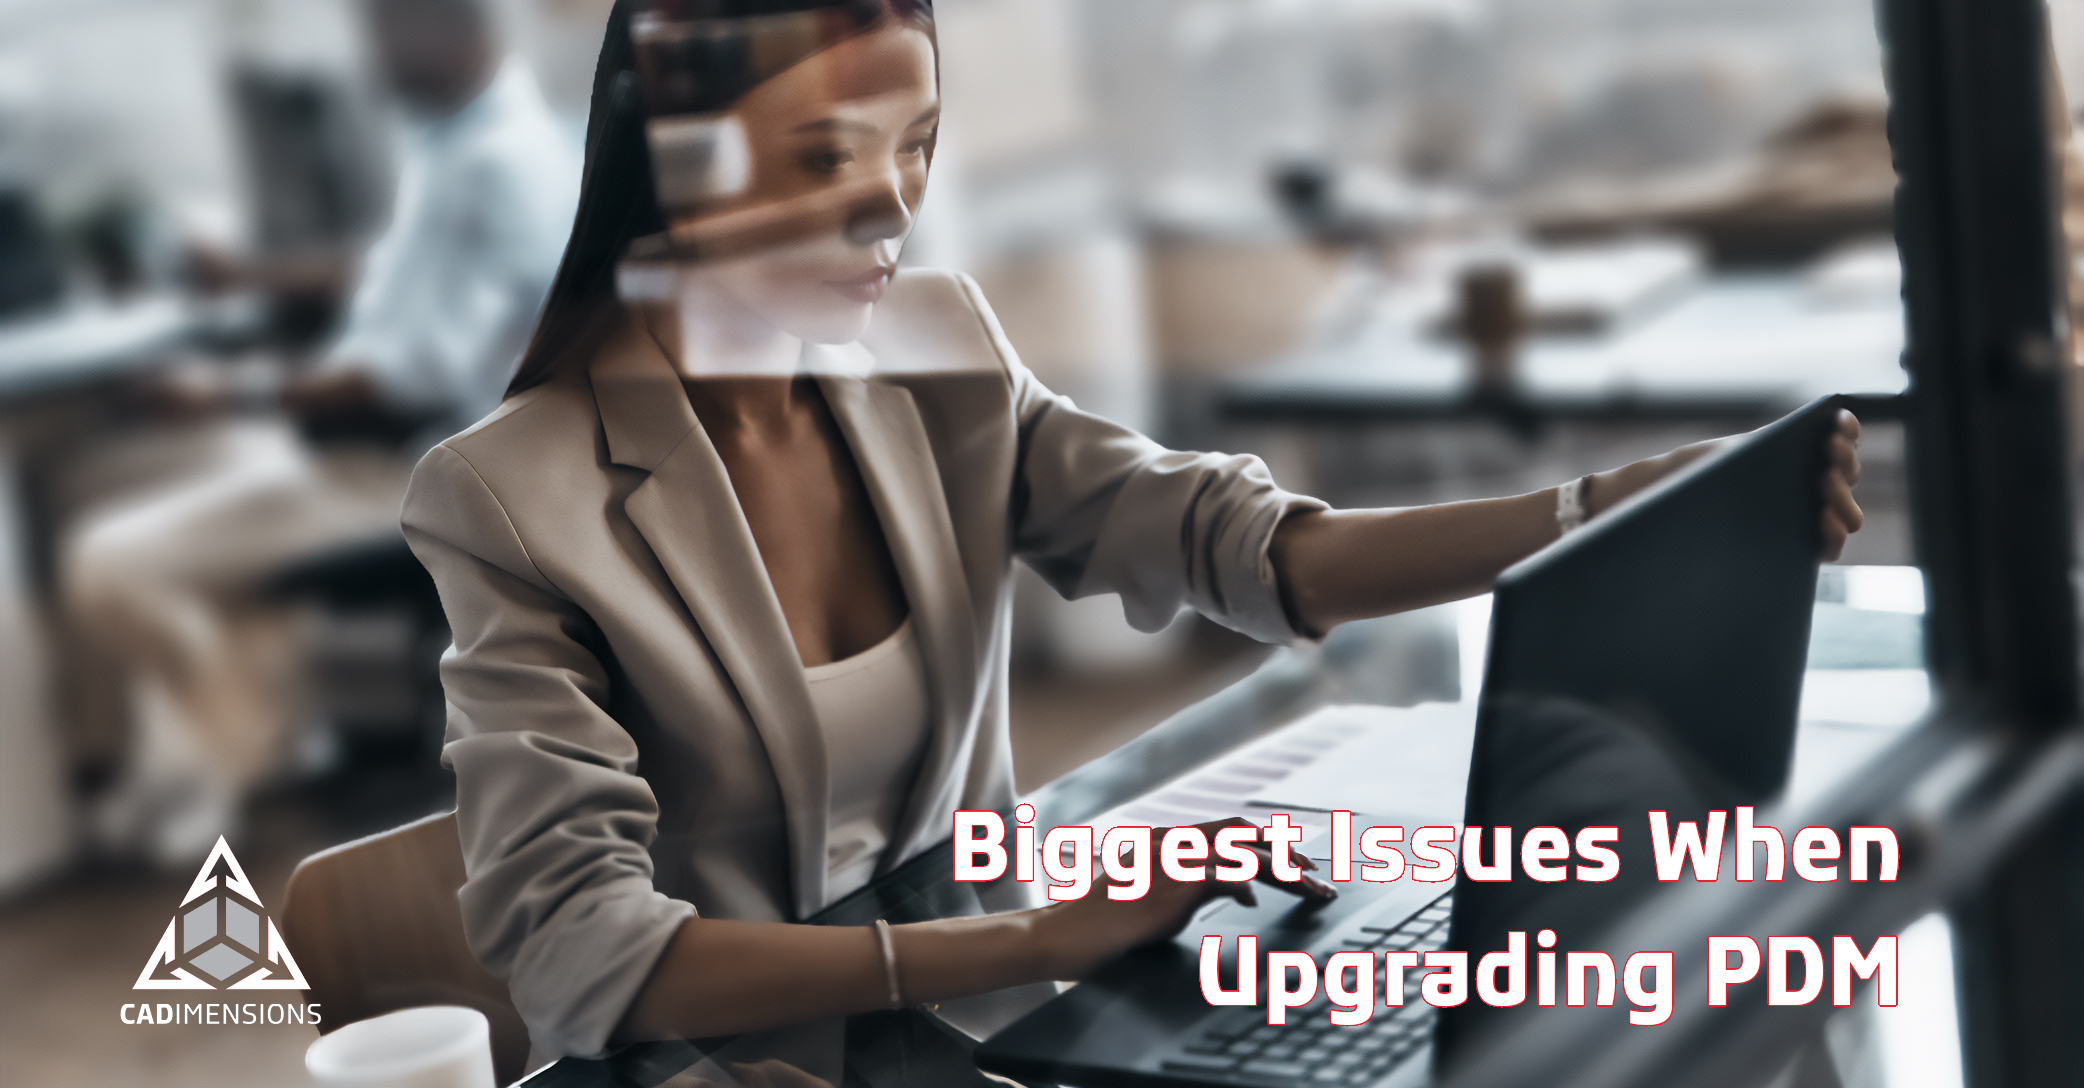 Upgrading PDM: Avoid These 3 Biggest Issues for Administrators